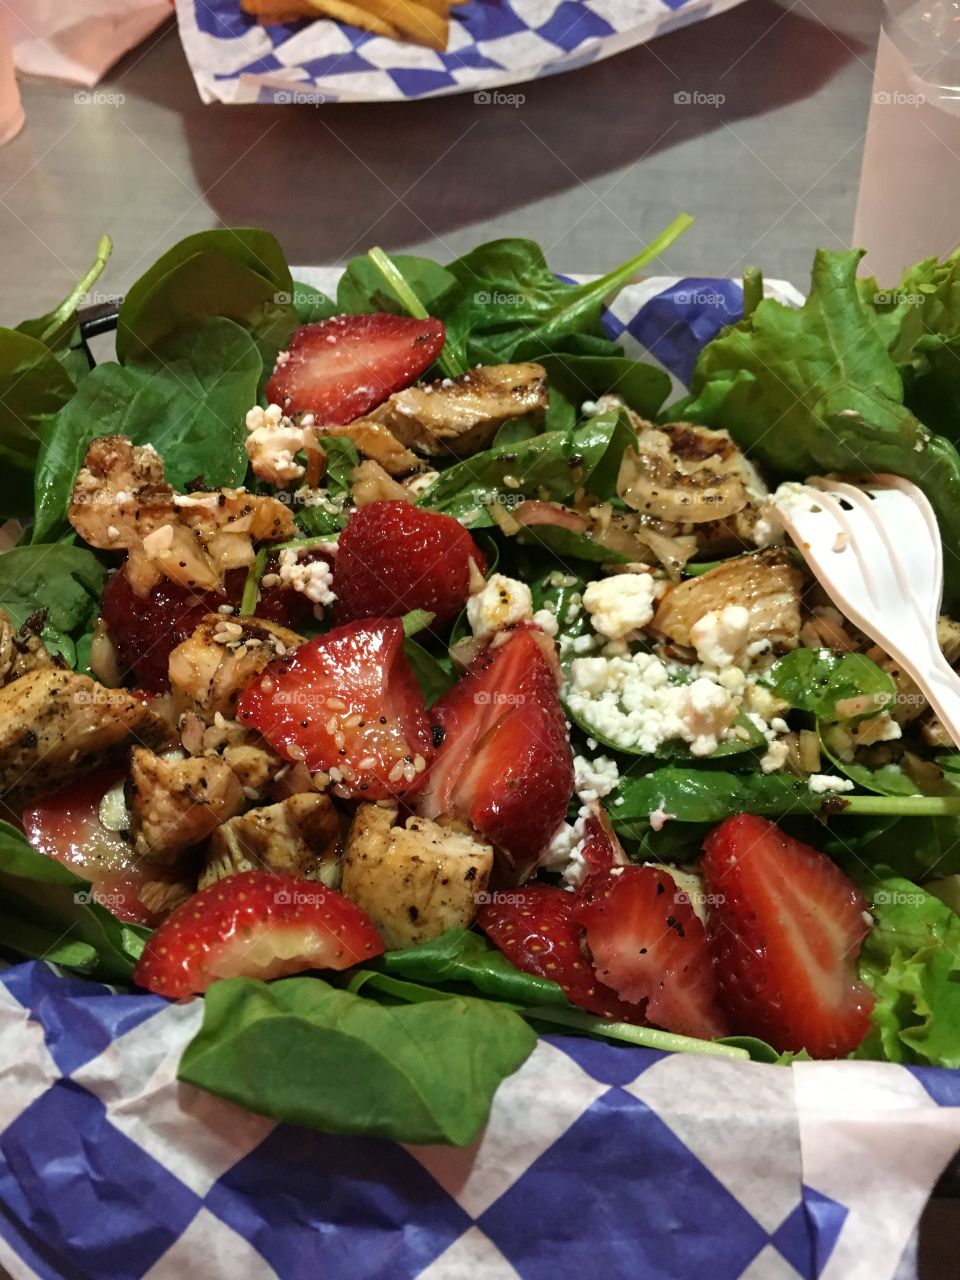 Spinach salad with chicken and strawberries